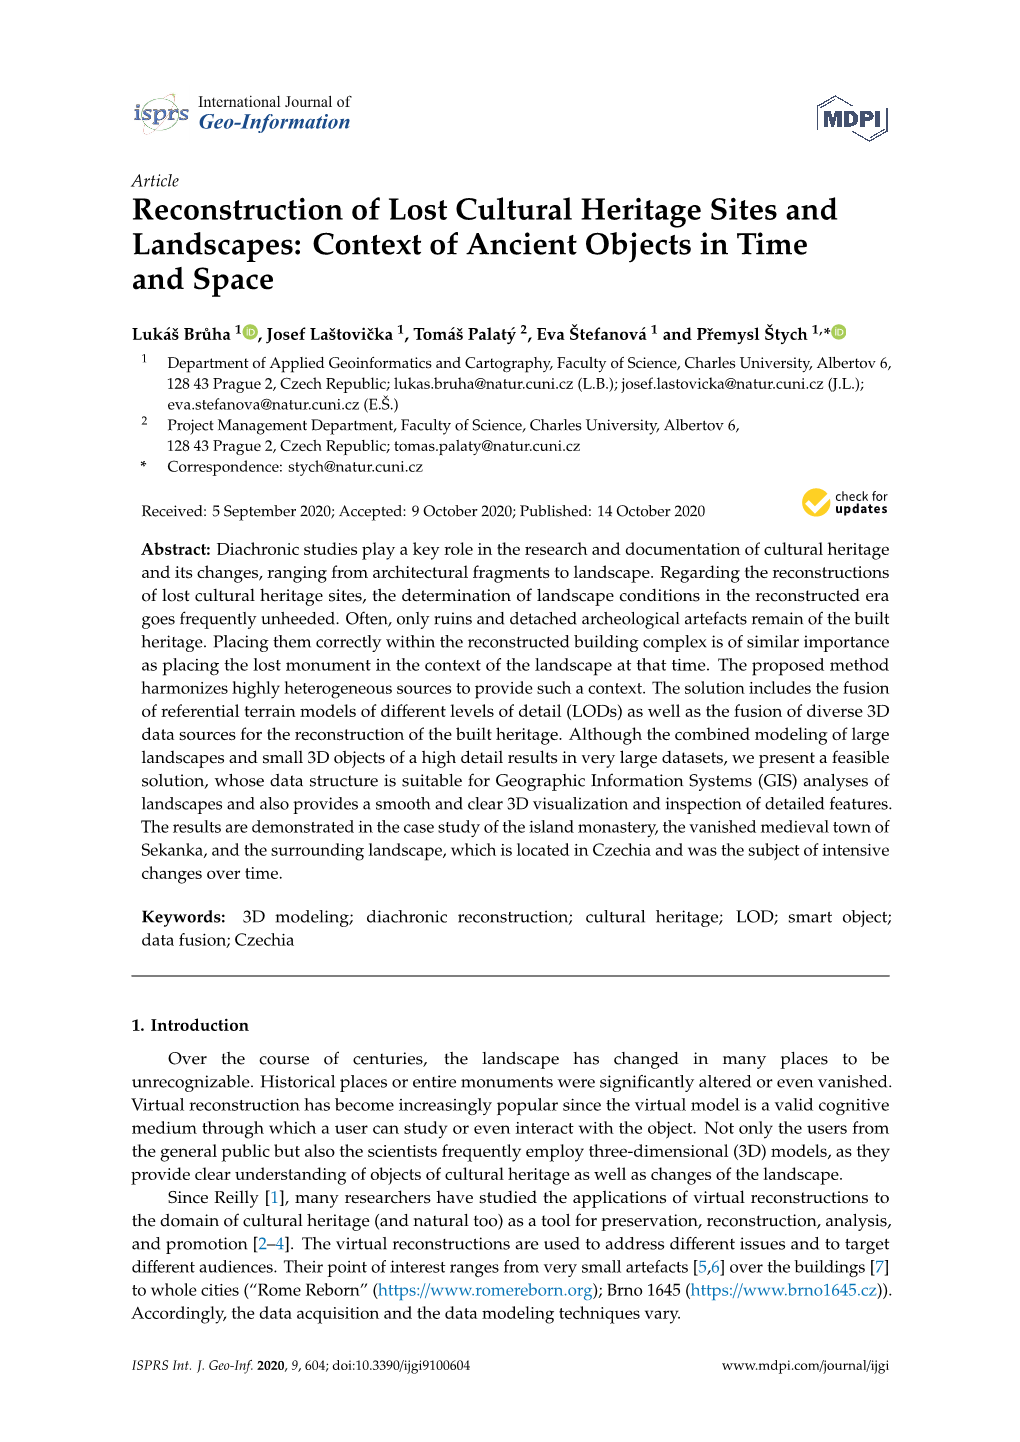 Reconstruction of Lost Cultural Heritage Sites and Landscapes: Context of Ancient Objects in Time and Space